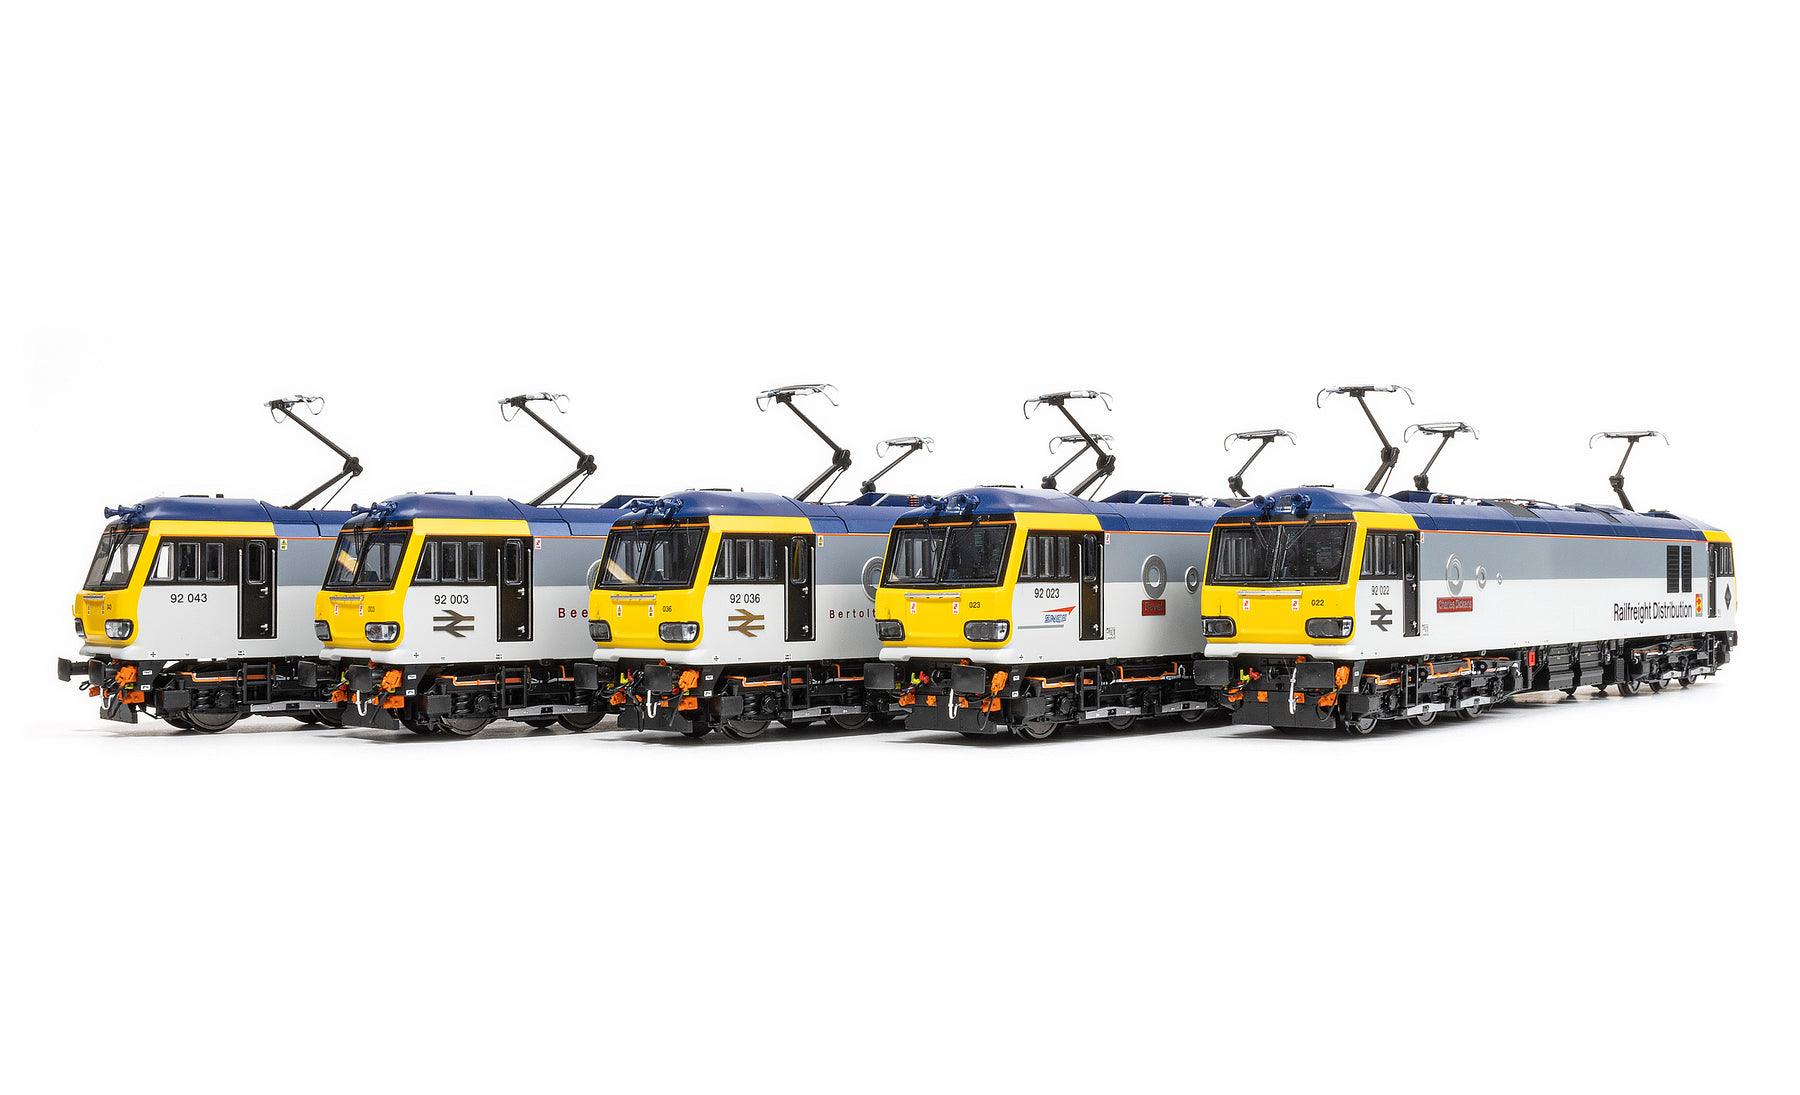 Class 92 Delivery Update